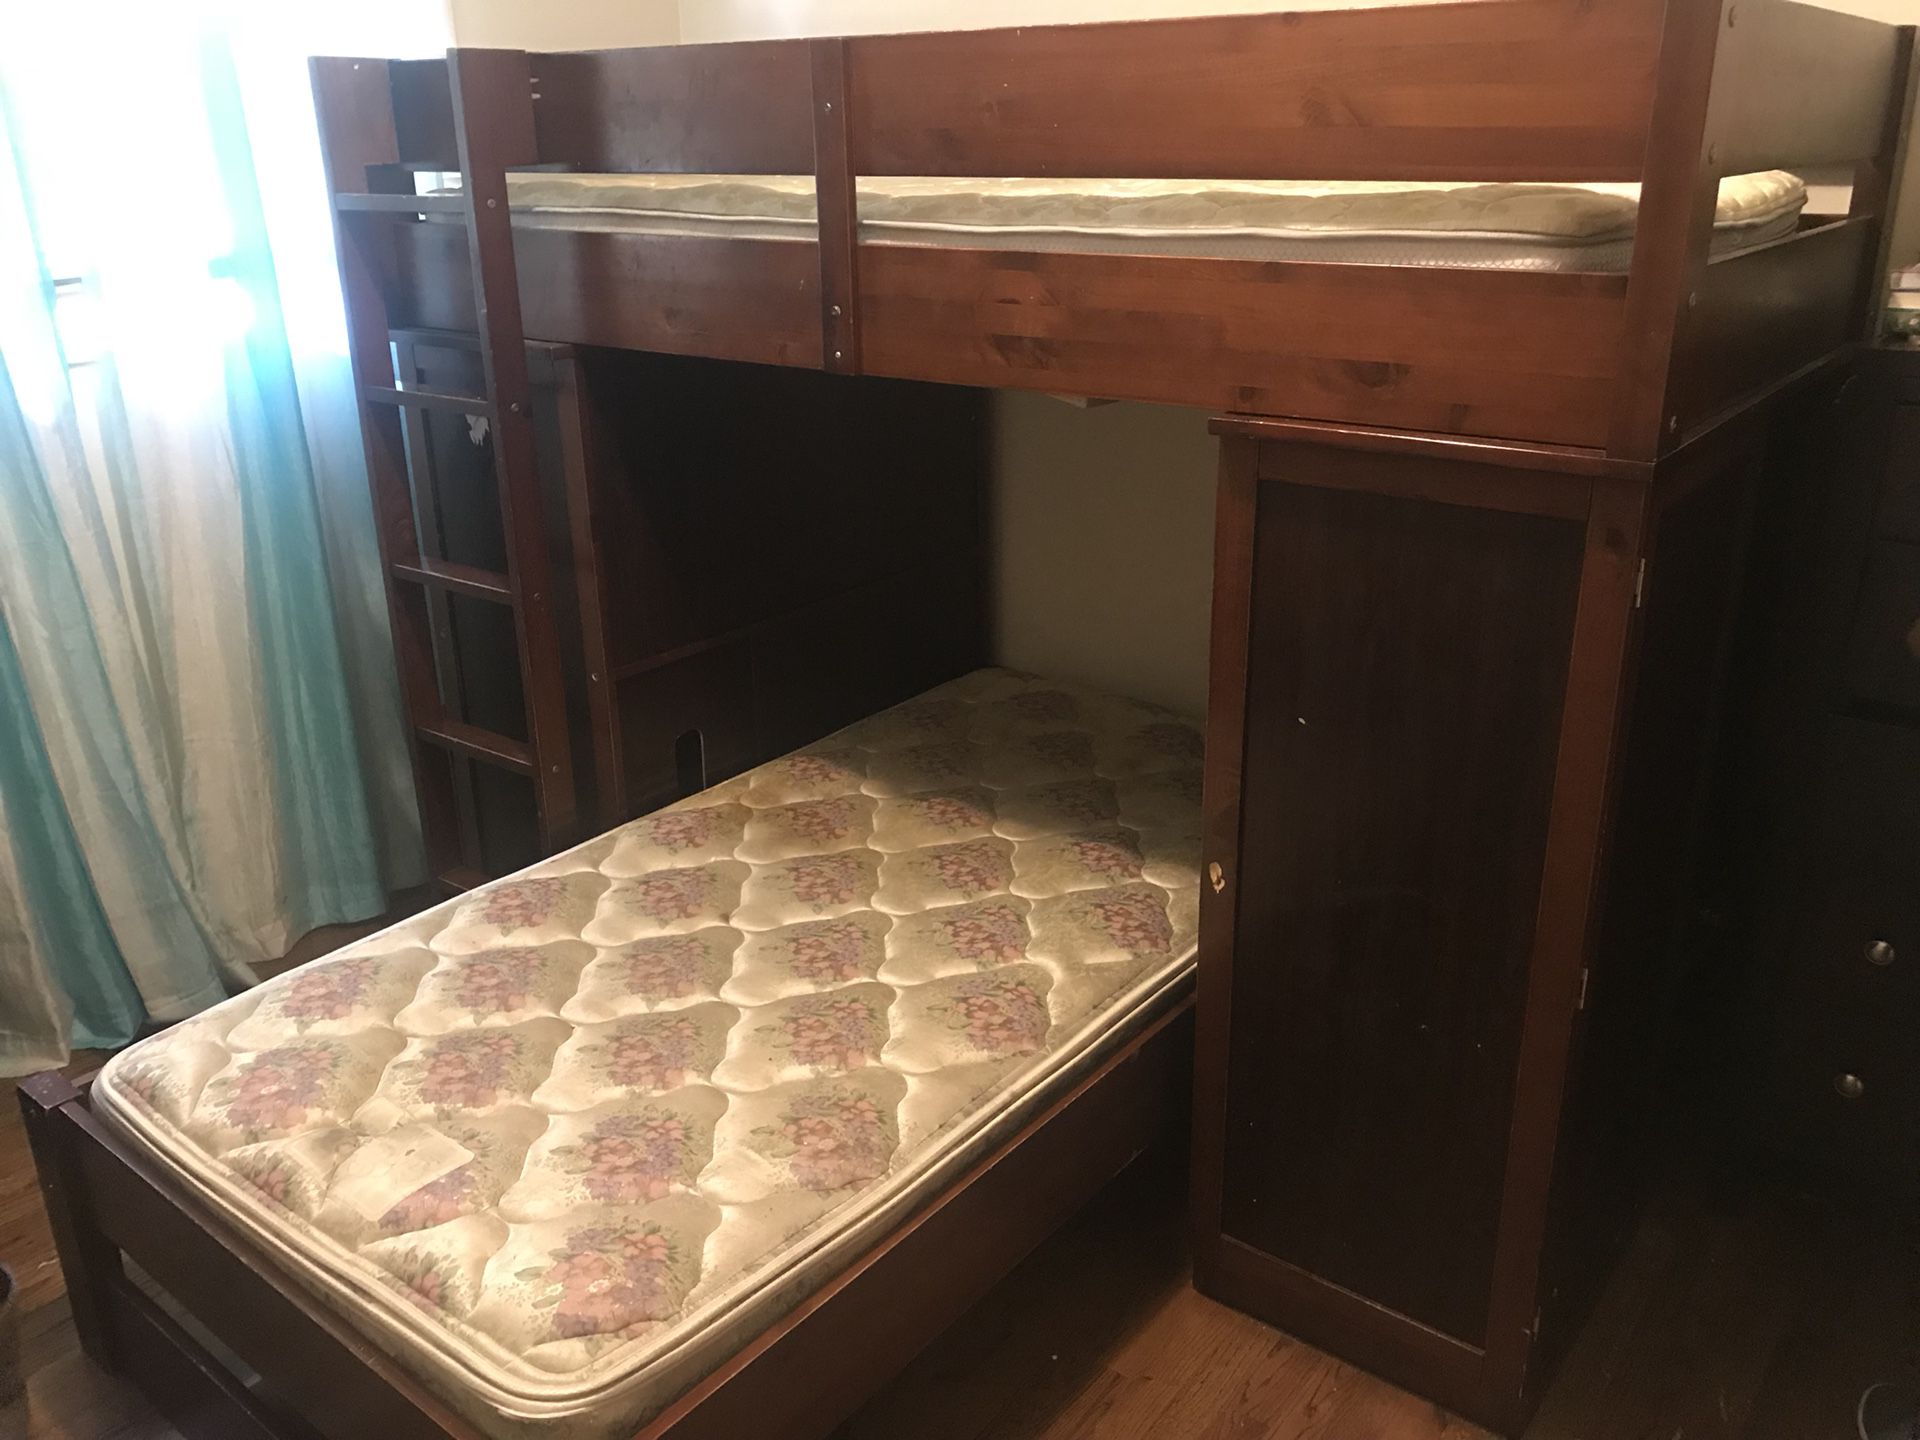 Two story junior bed with mattresses